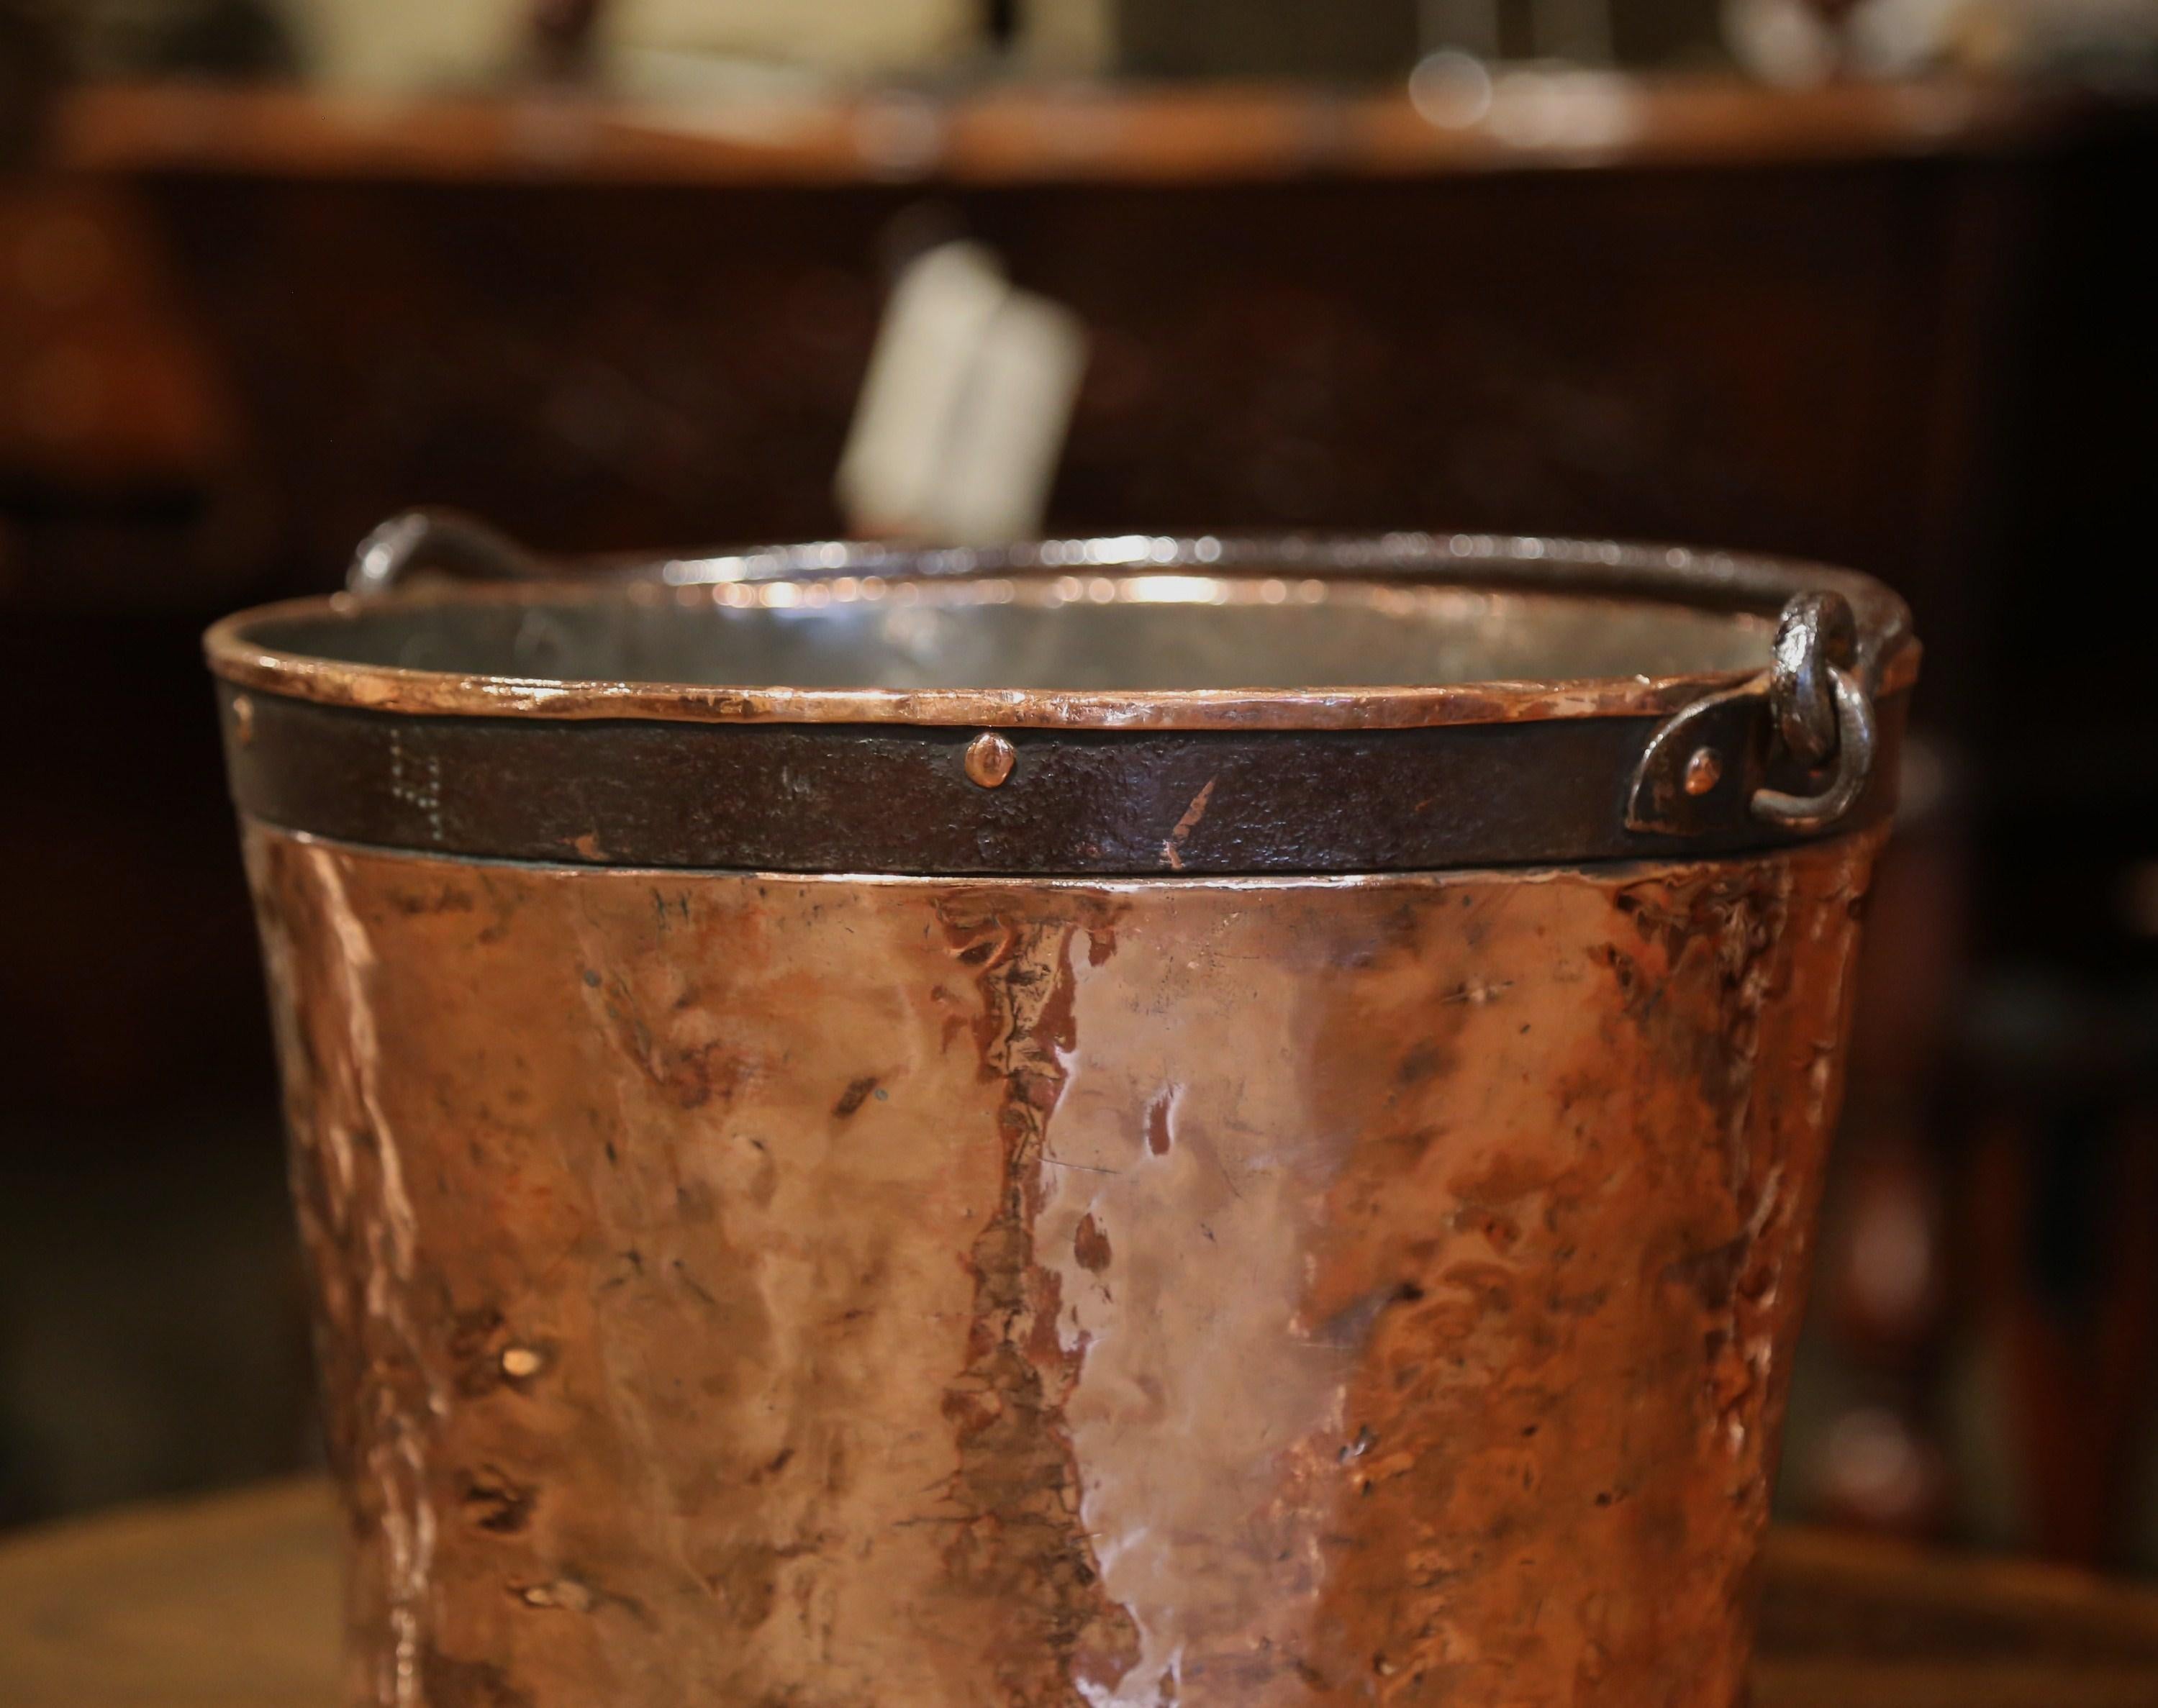 Use this versatile antique bucket as a cache pot or a waste basket. Crafted in Normandy France circa 1780, and made of copper and iron, the piece features a forged handle and two decorative iron rings at the top and bottom. The elegant measure